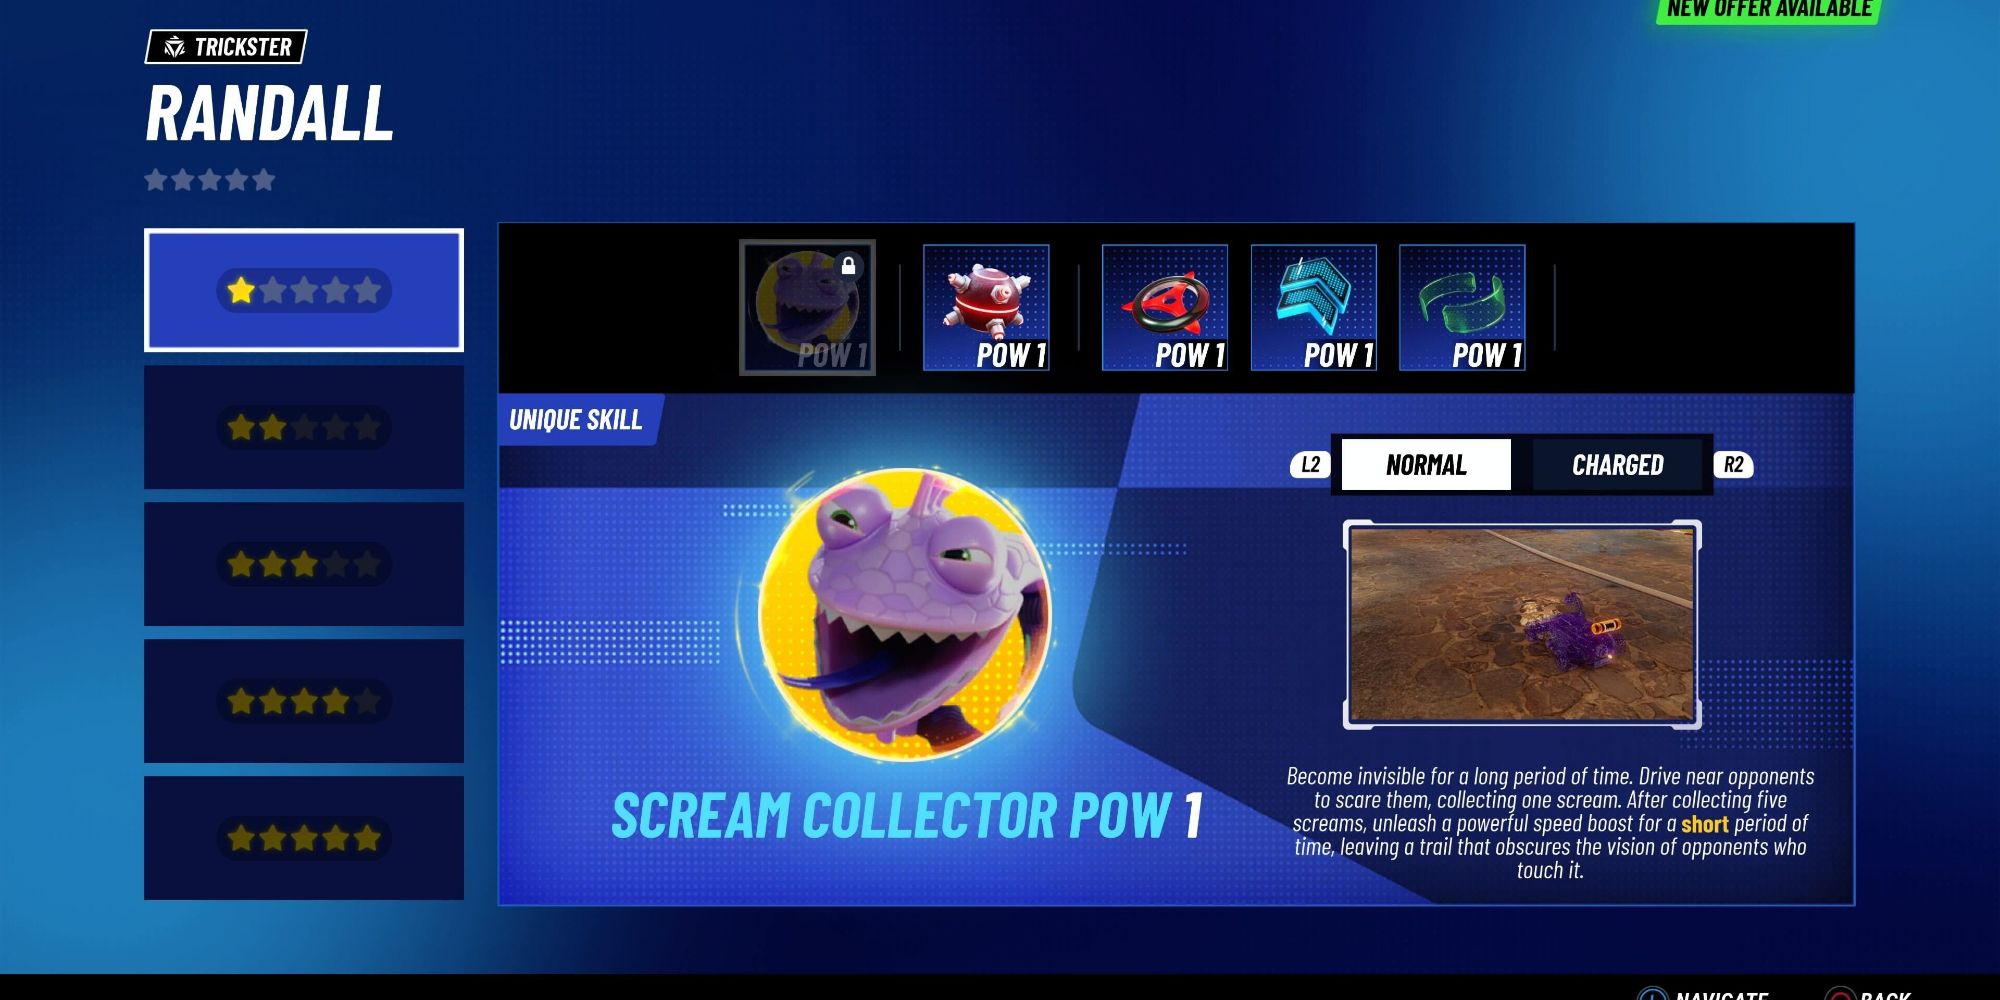 Randall's unique skill in Disney Speedstorm, known as Scream Collector